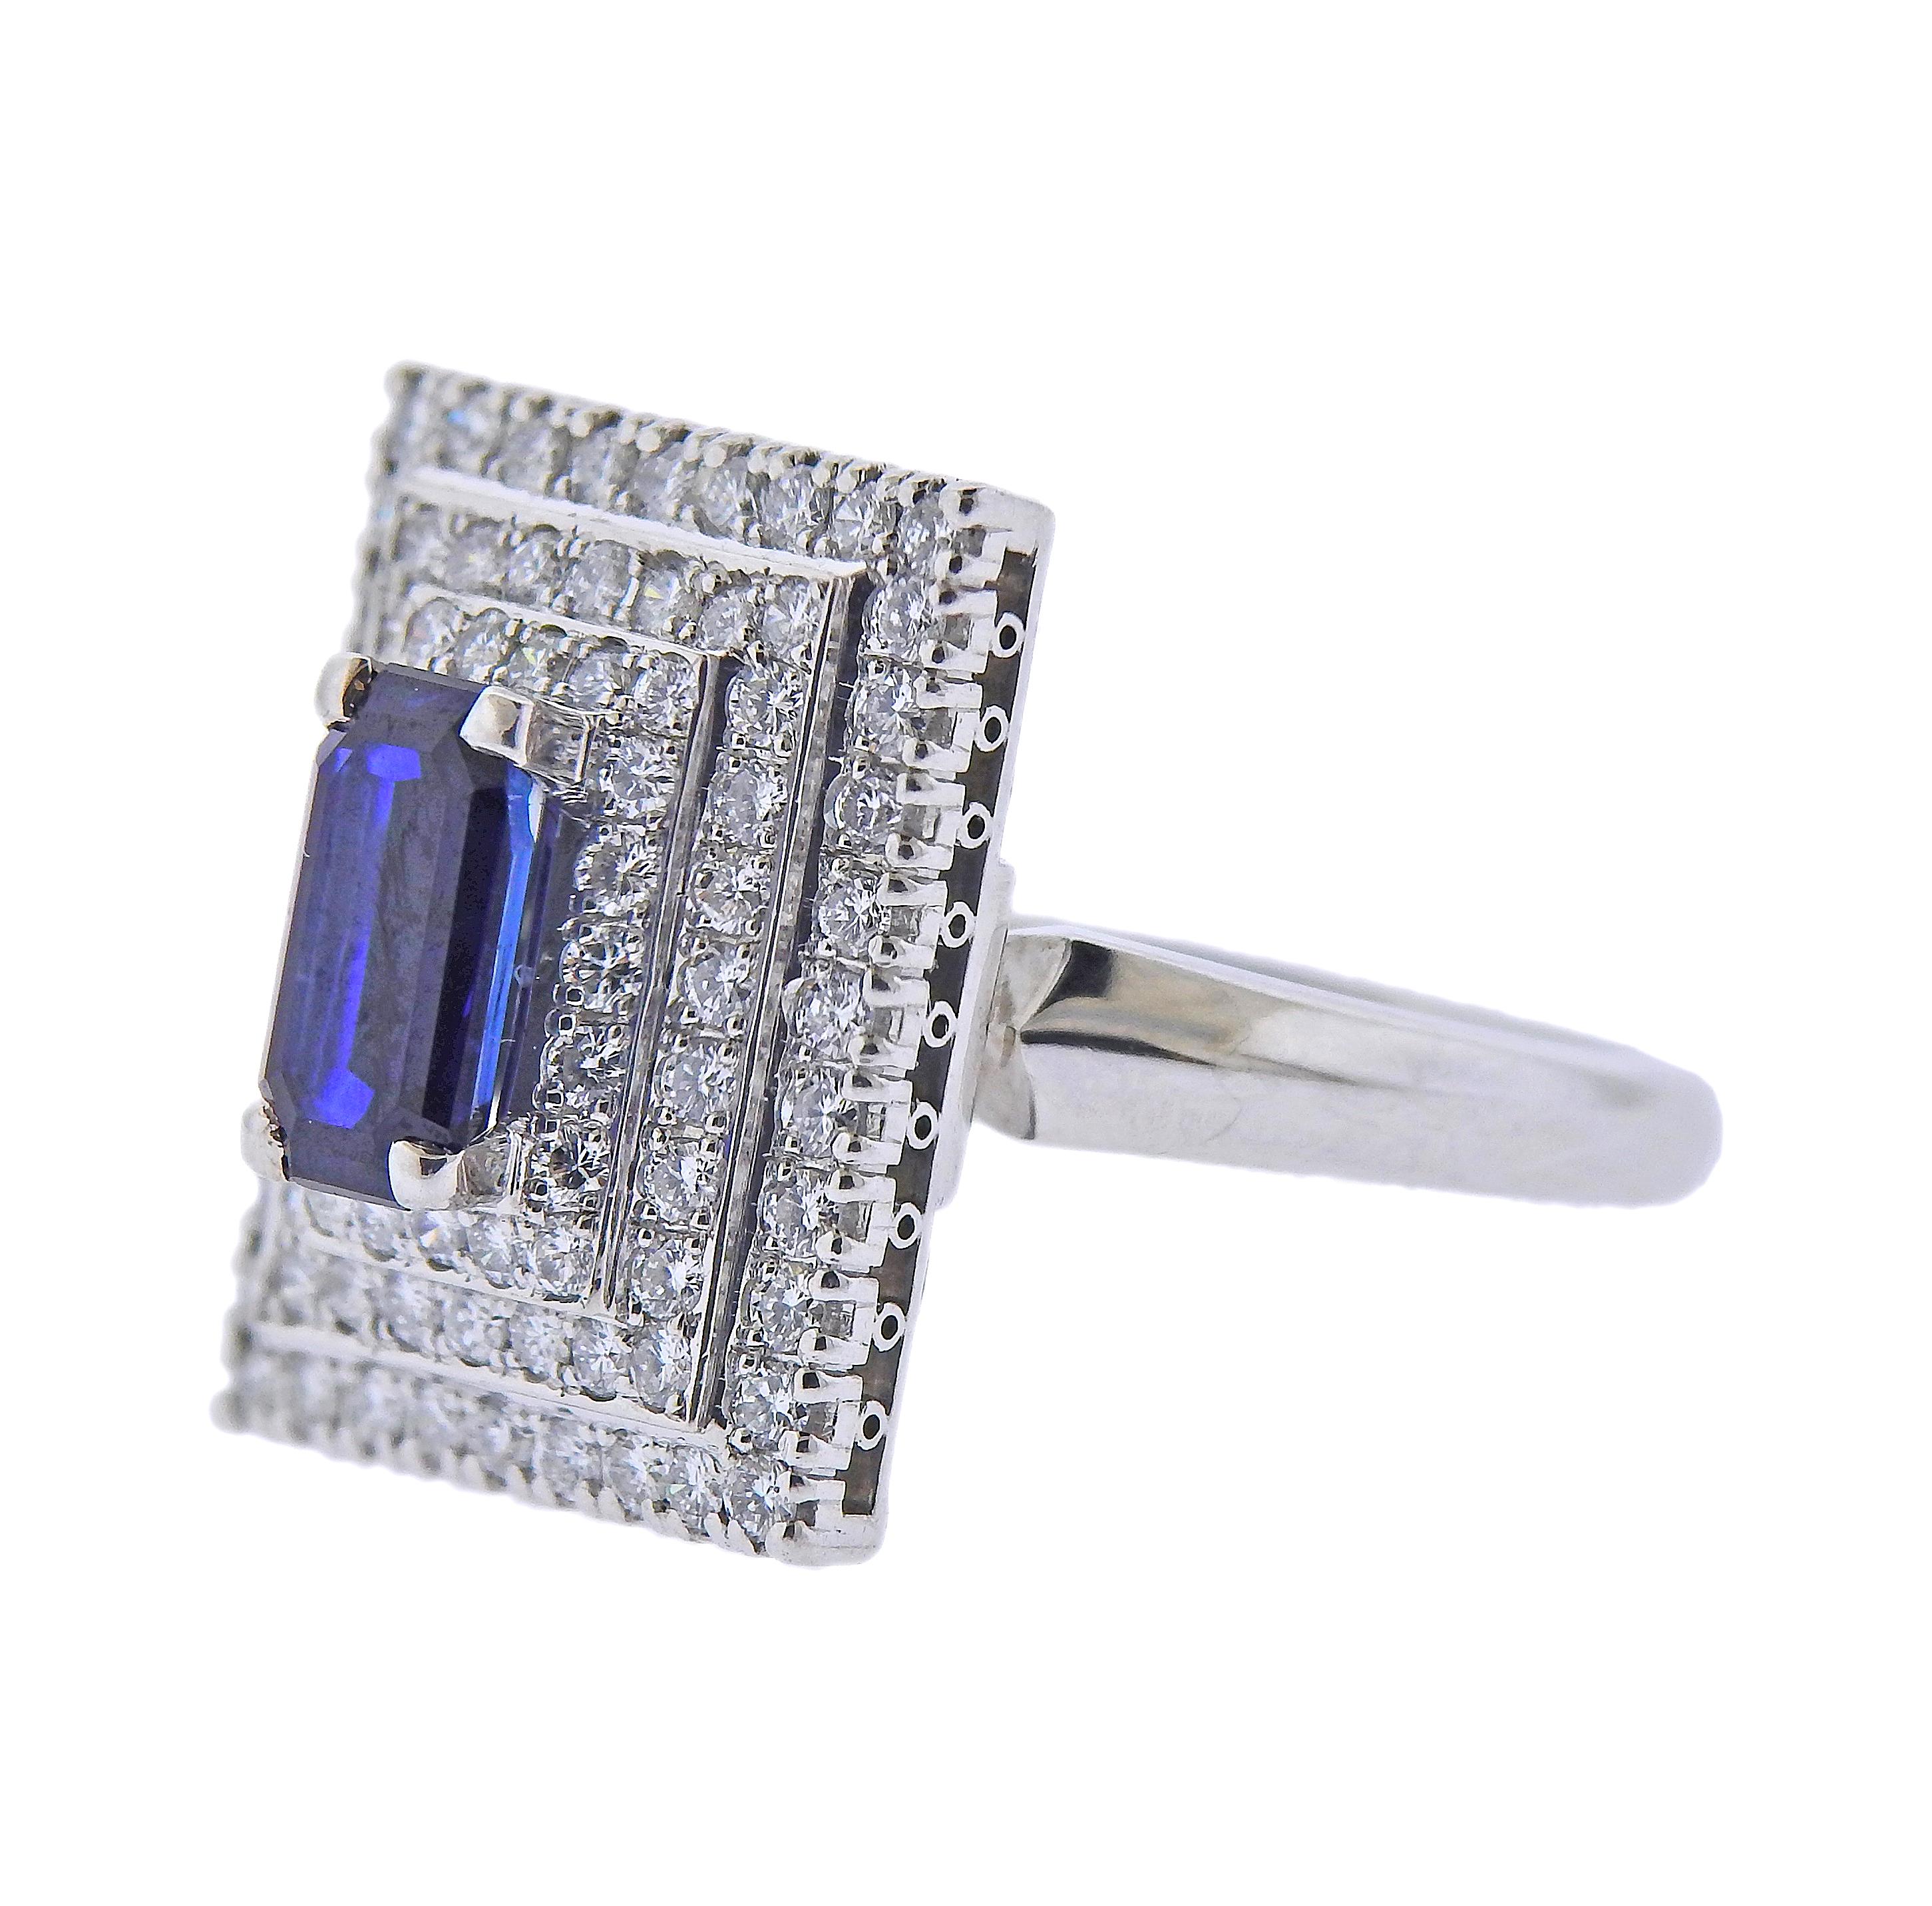 Platinum cocktail ring, with center 1.44ct sapphire, surrounded with 0.86ctw in diamonds. Ring size - 6.25, ring top - 18mm x 14mm. Marked: pt900, D0.86, S1.44. Weight - 8.9 grams. 